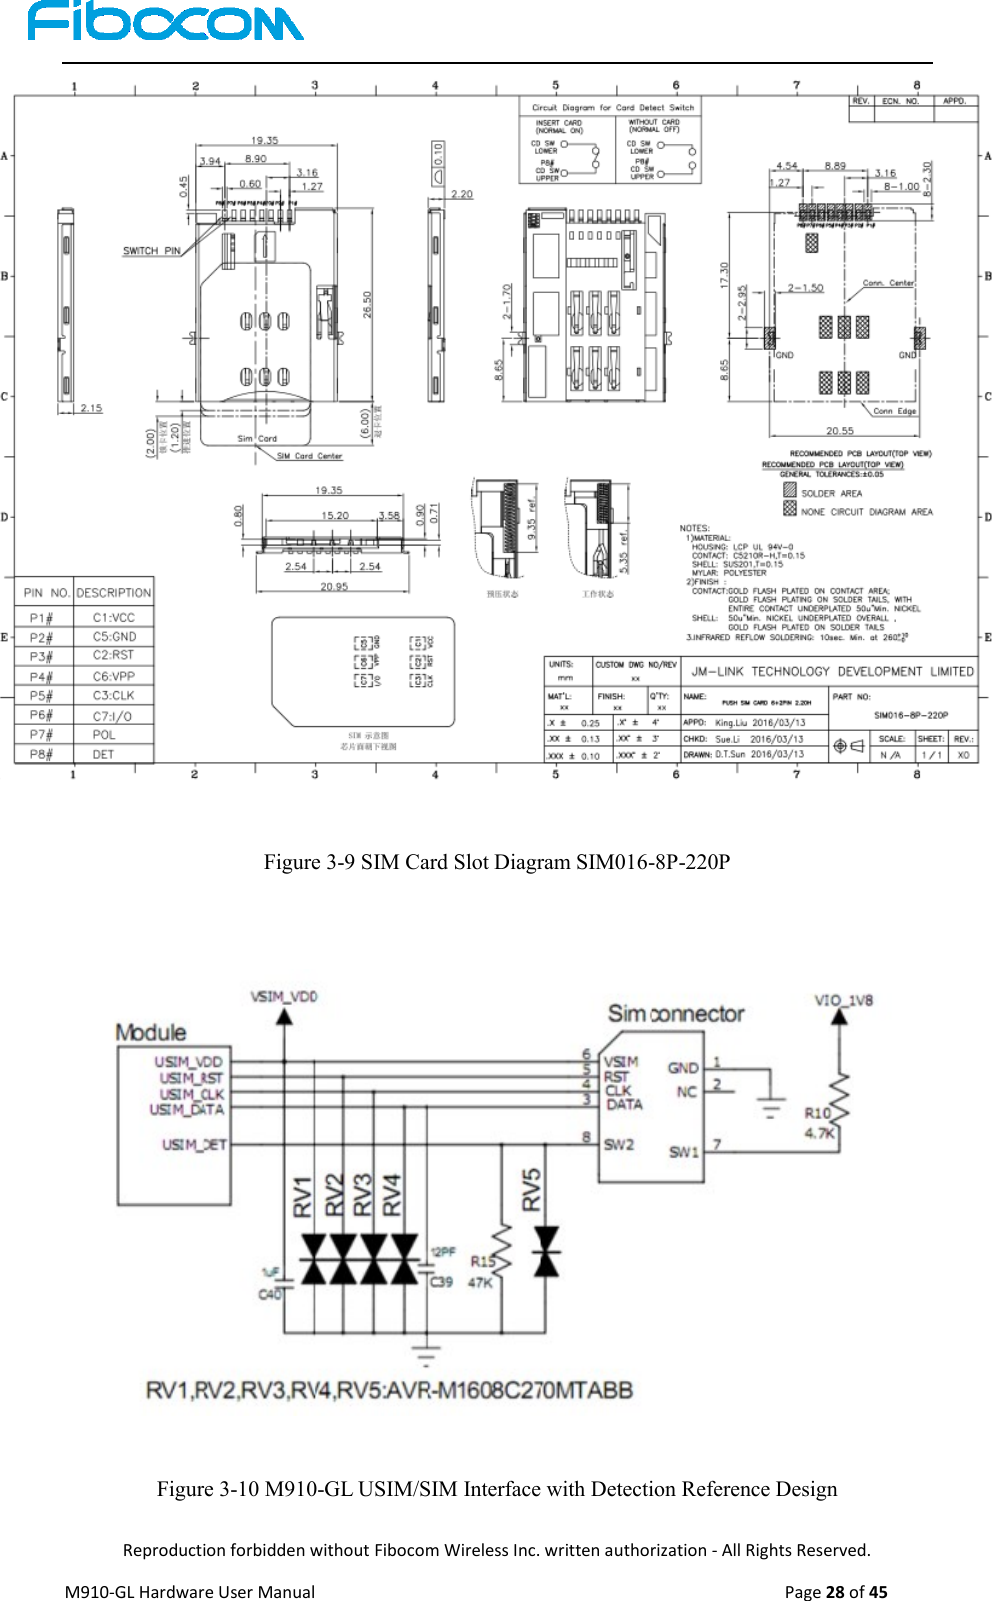  Reproduction forbidden without Fibocom Wireless Inc. written authorization - All Rights Reserved. M910-GL Hardware User Manual                                                                                                  Page 28 of 45   Figure 3-9 SIM Card Slot Diagram SIM016-8P-220P   Figure 3-10 M910-GL USIM/SIM Interface with Detection Reference Design 